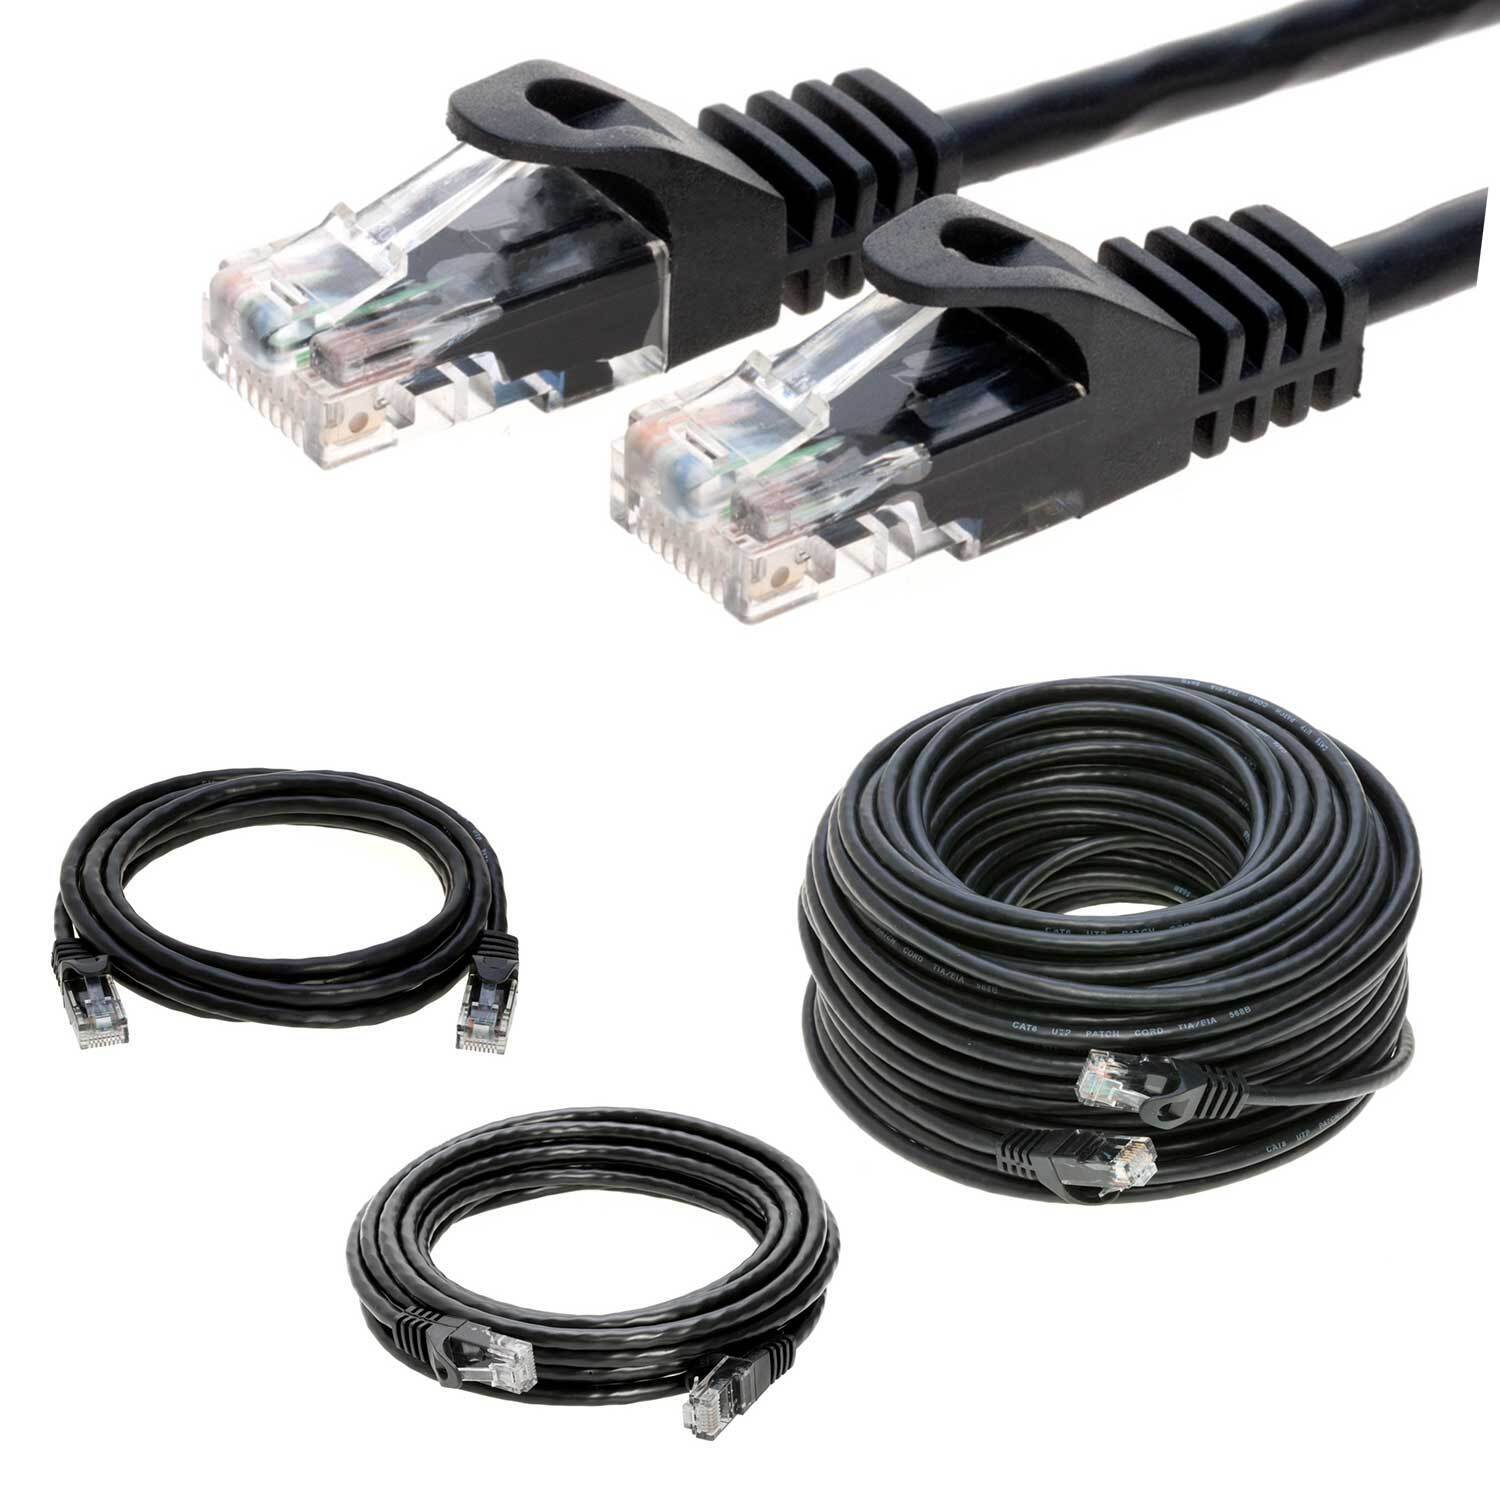 CAT5 Cat5e Patch Cable Ethernet Network Computer PC XBOX, PS3, PS4 Black lot